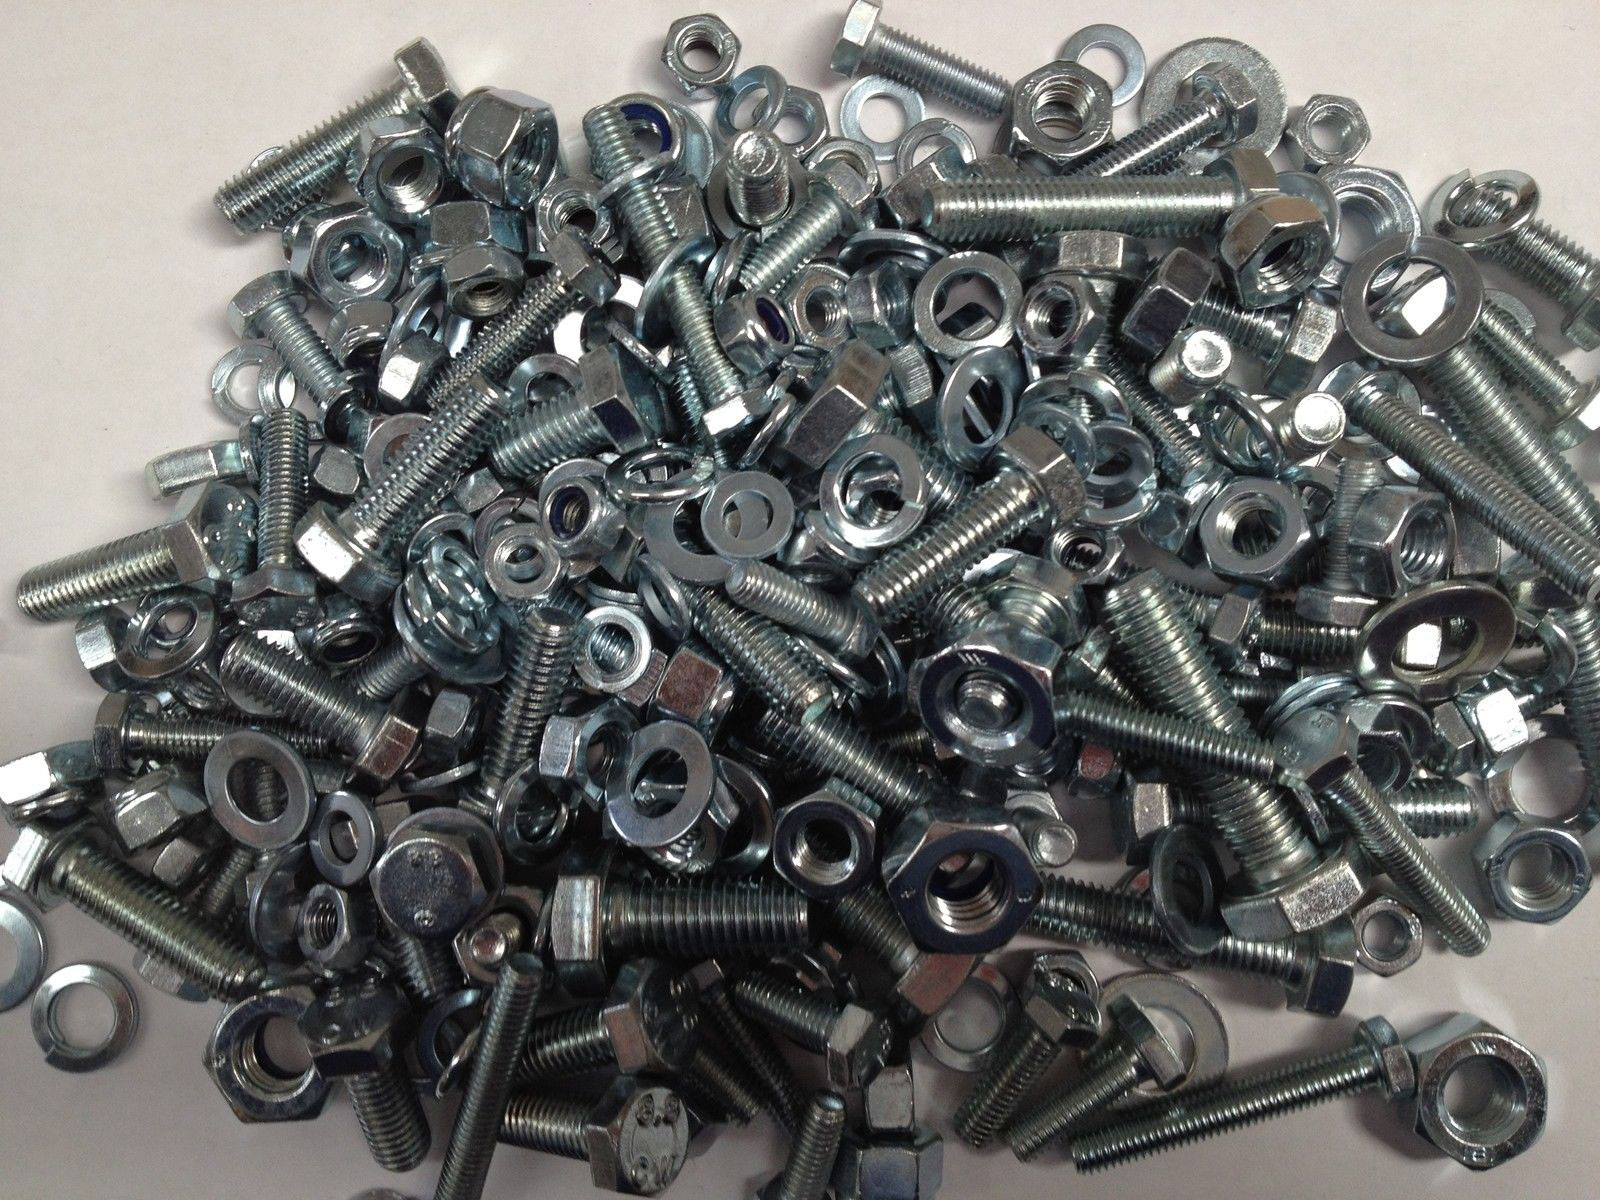 UNF STAINLESS STEEL NUTS BOLTS WASHERS QTY 450 MGB